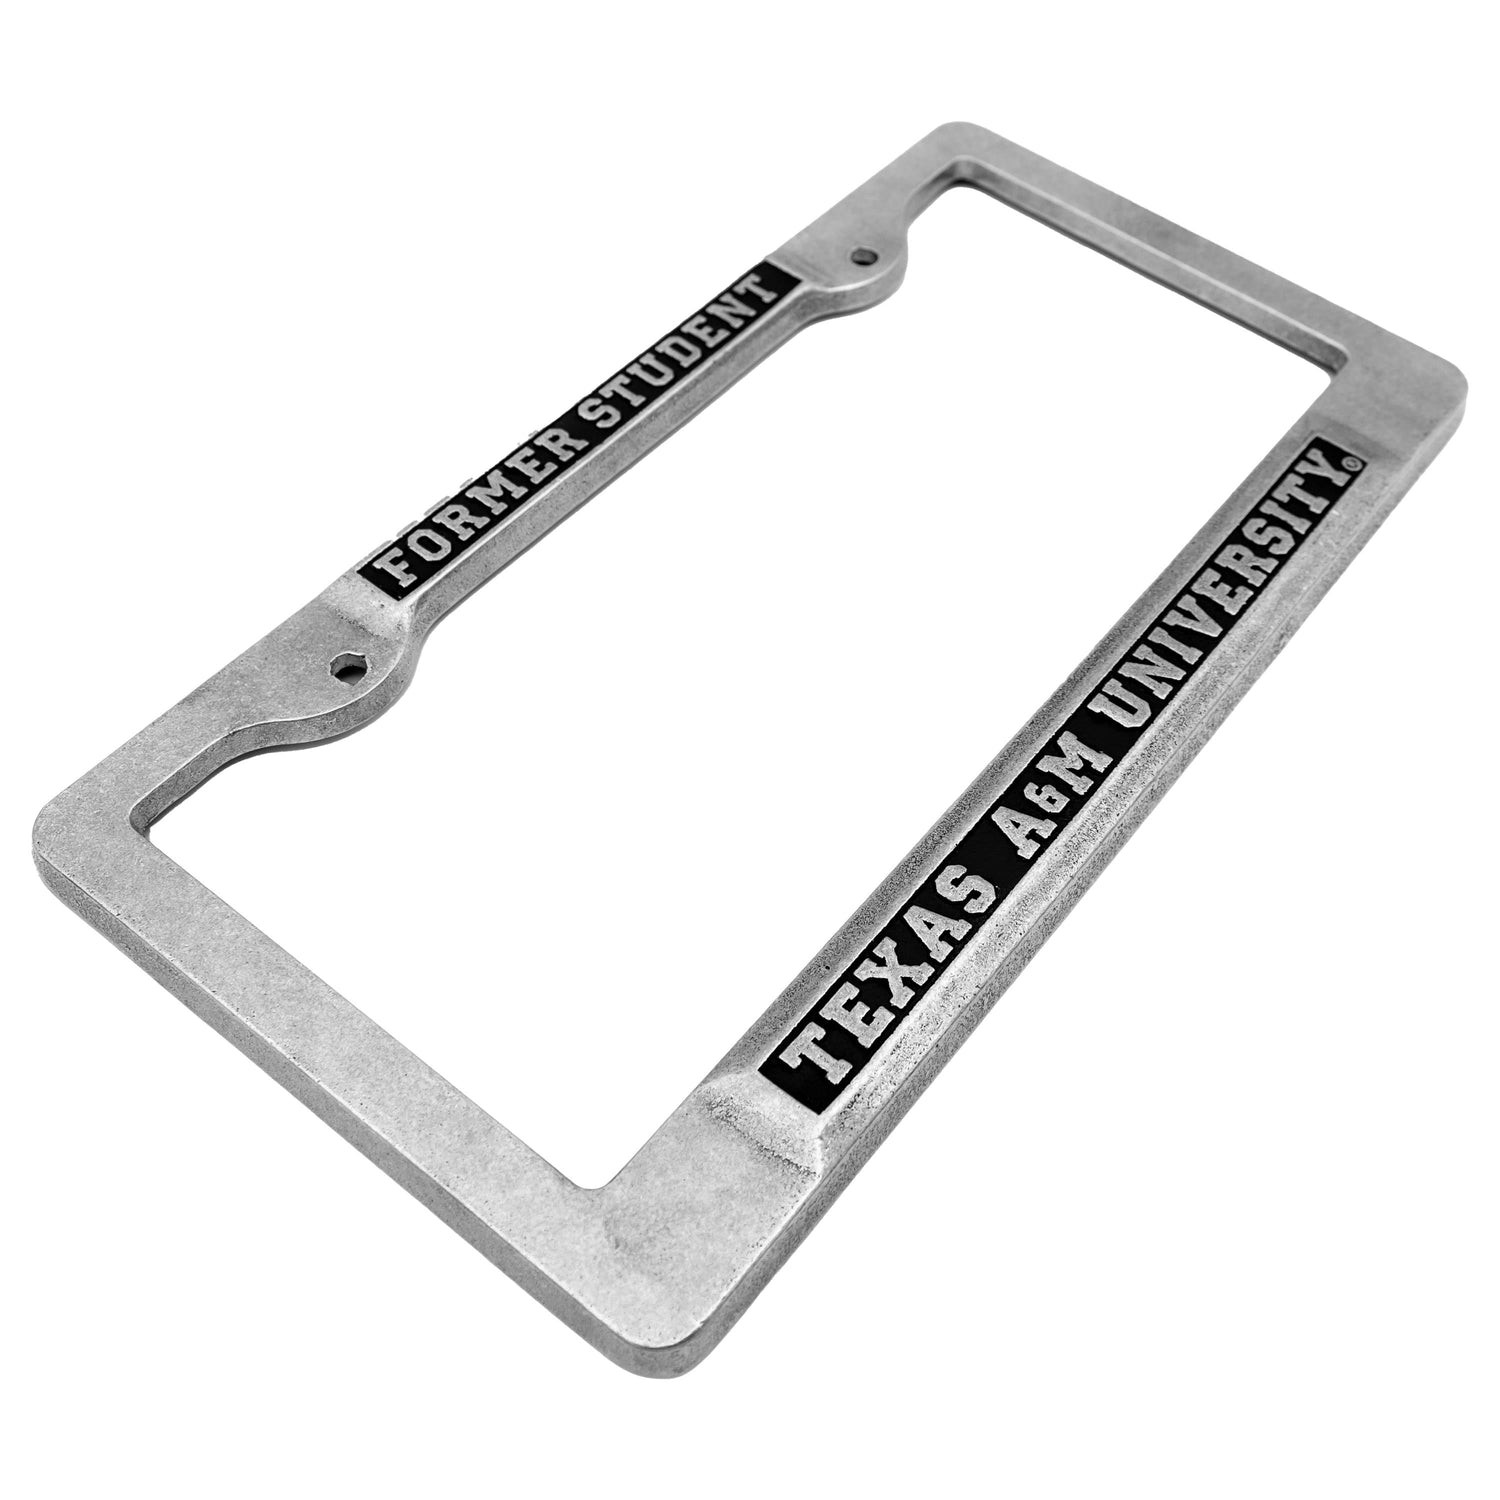 Texas A&M Former Student License Plate Frame